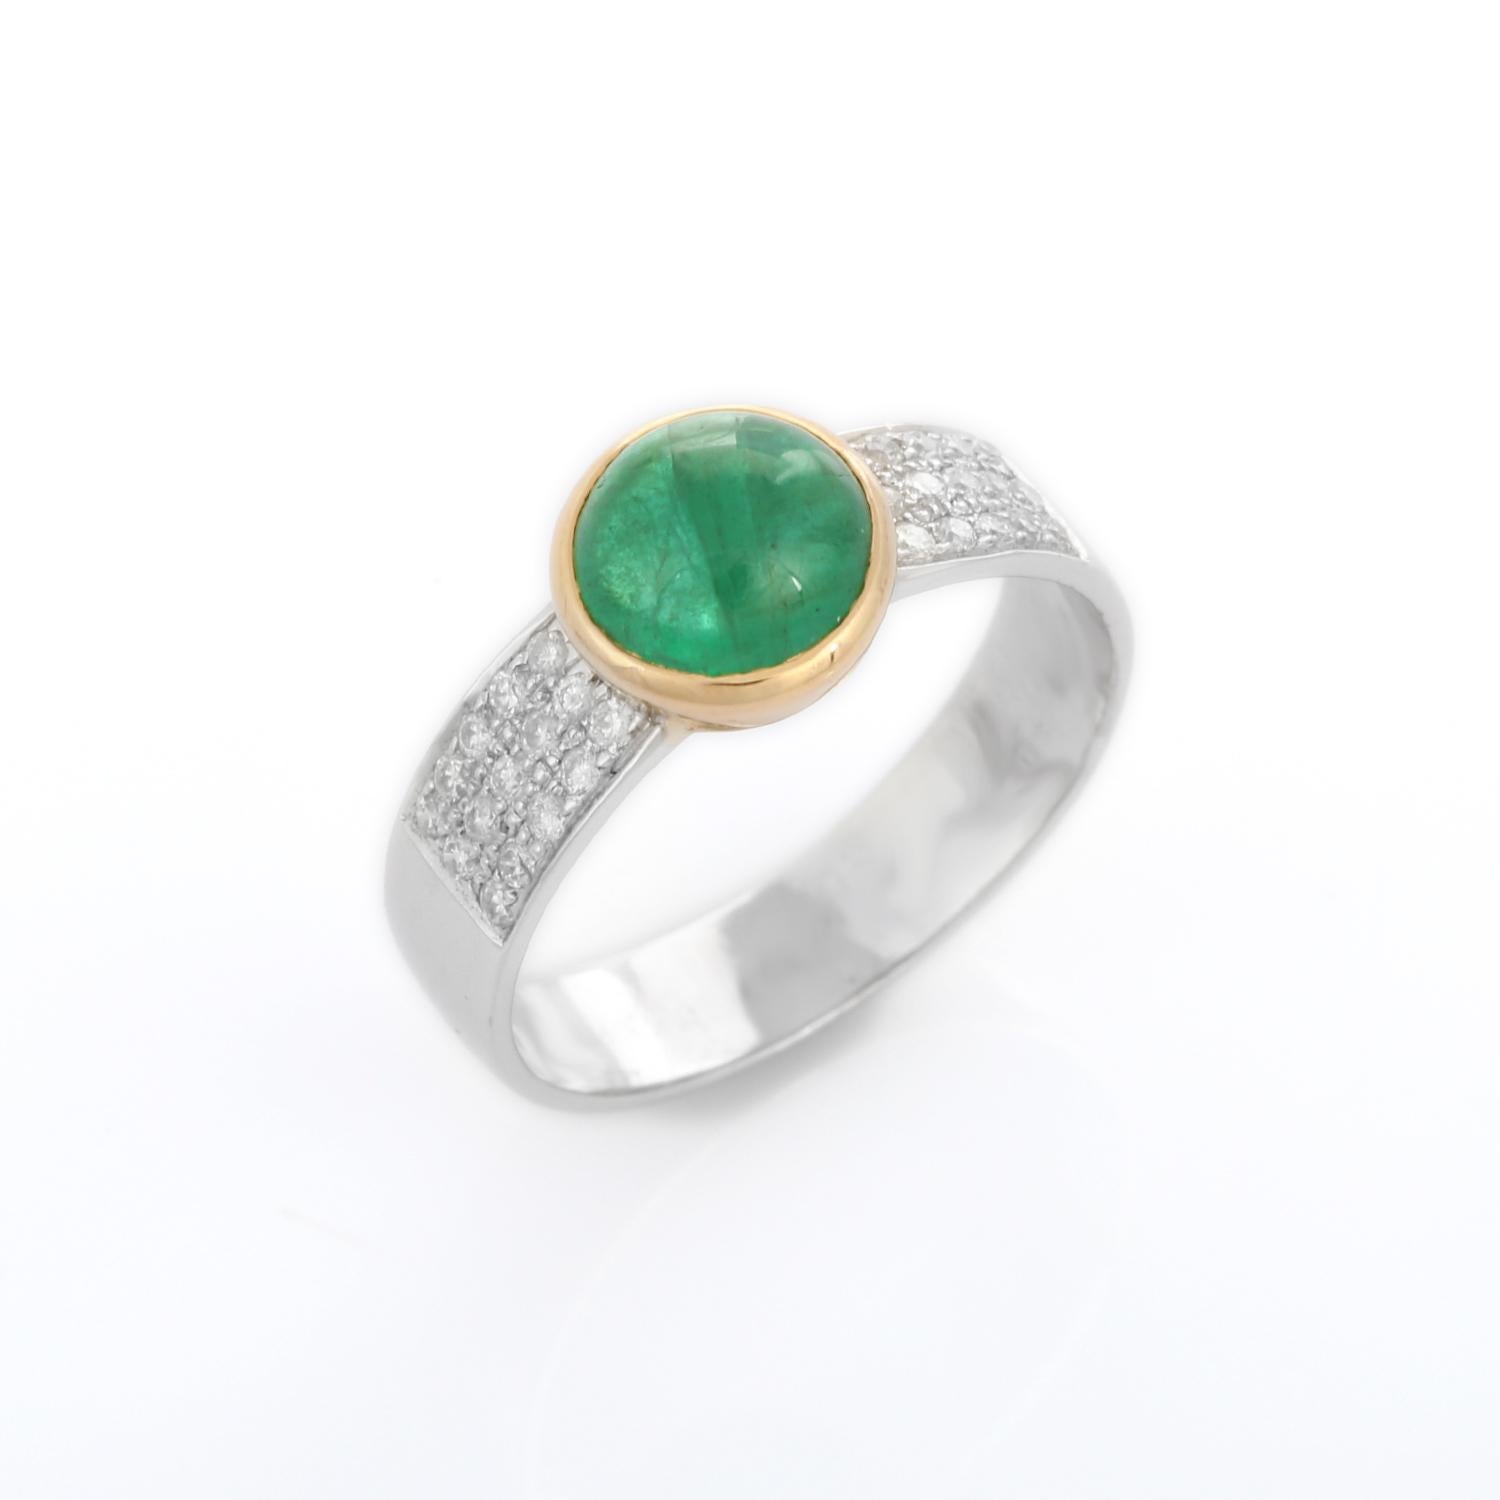 For Sale:  1.72 Carat Emerald and Diamond Ring in 18K White Gold  6